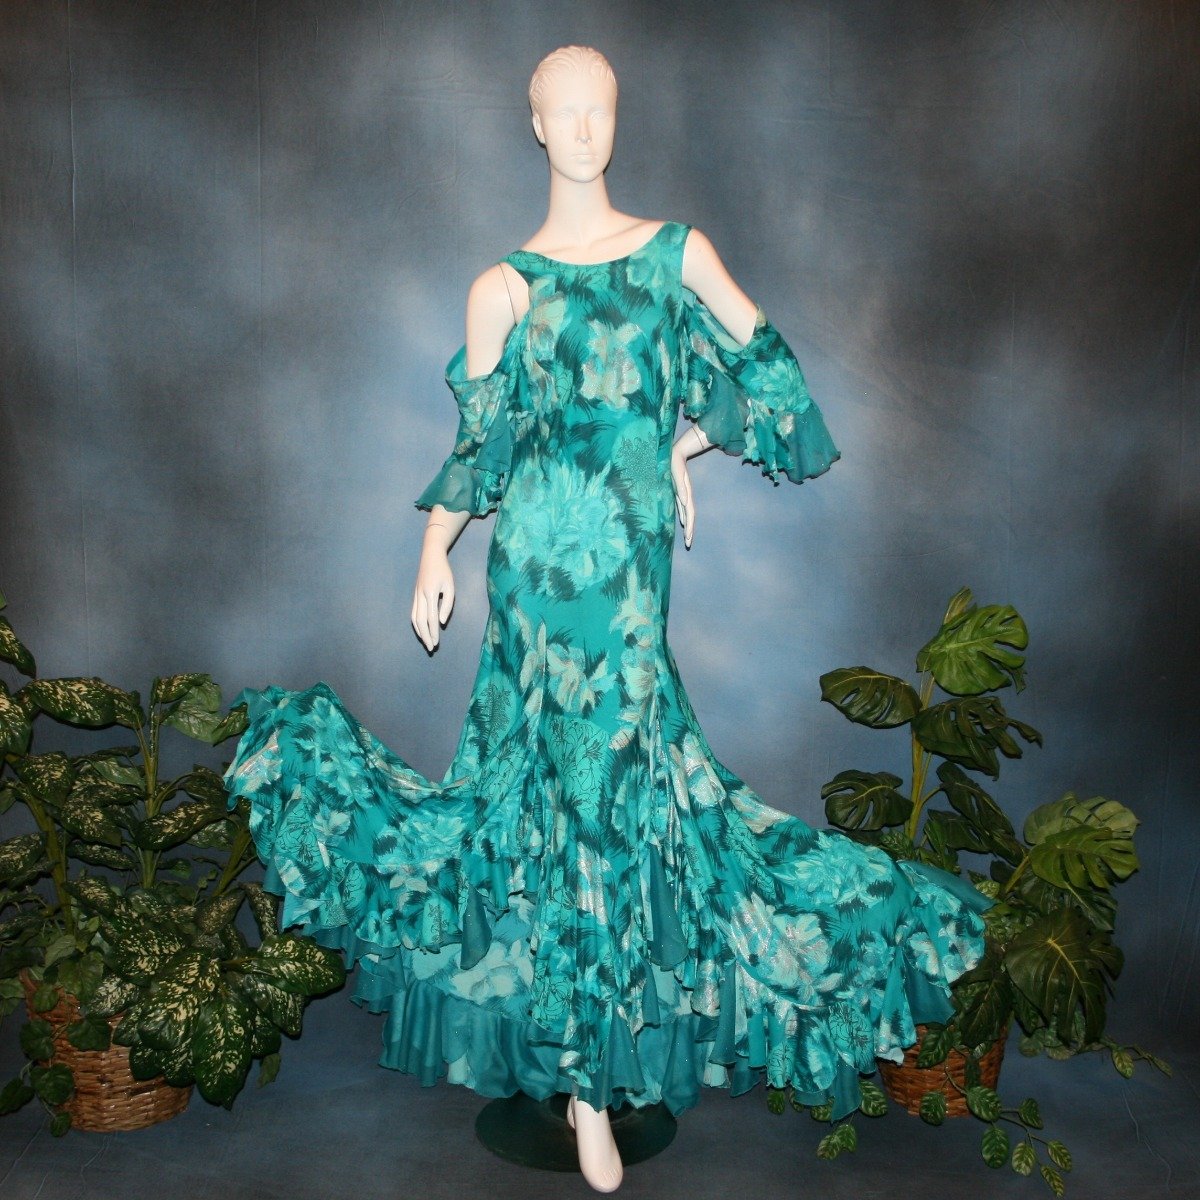 Gorgeous teal tropical print social ballroom dress created in tropical lycra print in shades of teal with a bit of silver sheen accents...absolutely gorgeous fabric! This social ballroom dress features very full skirting with 2 slits & oodles of flounces of the same teal tropical print lycra with intermittent flounces of teal glitter chiffon...along with draping, cold shoulder flounce sleeves...and a low back